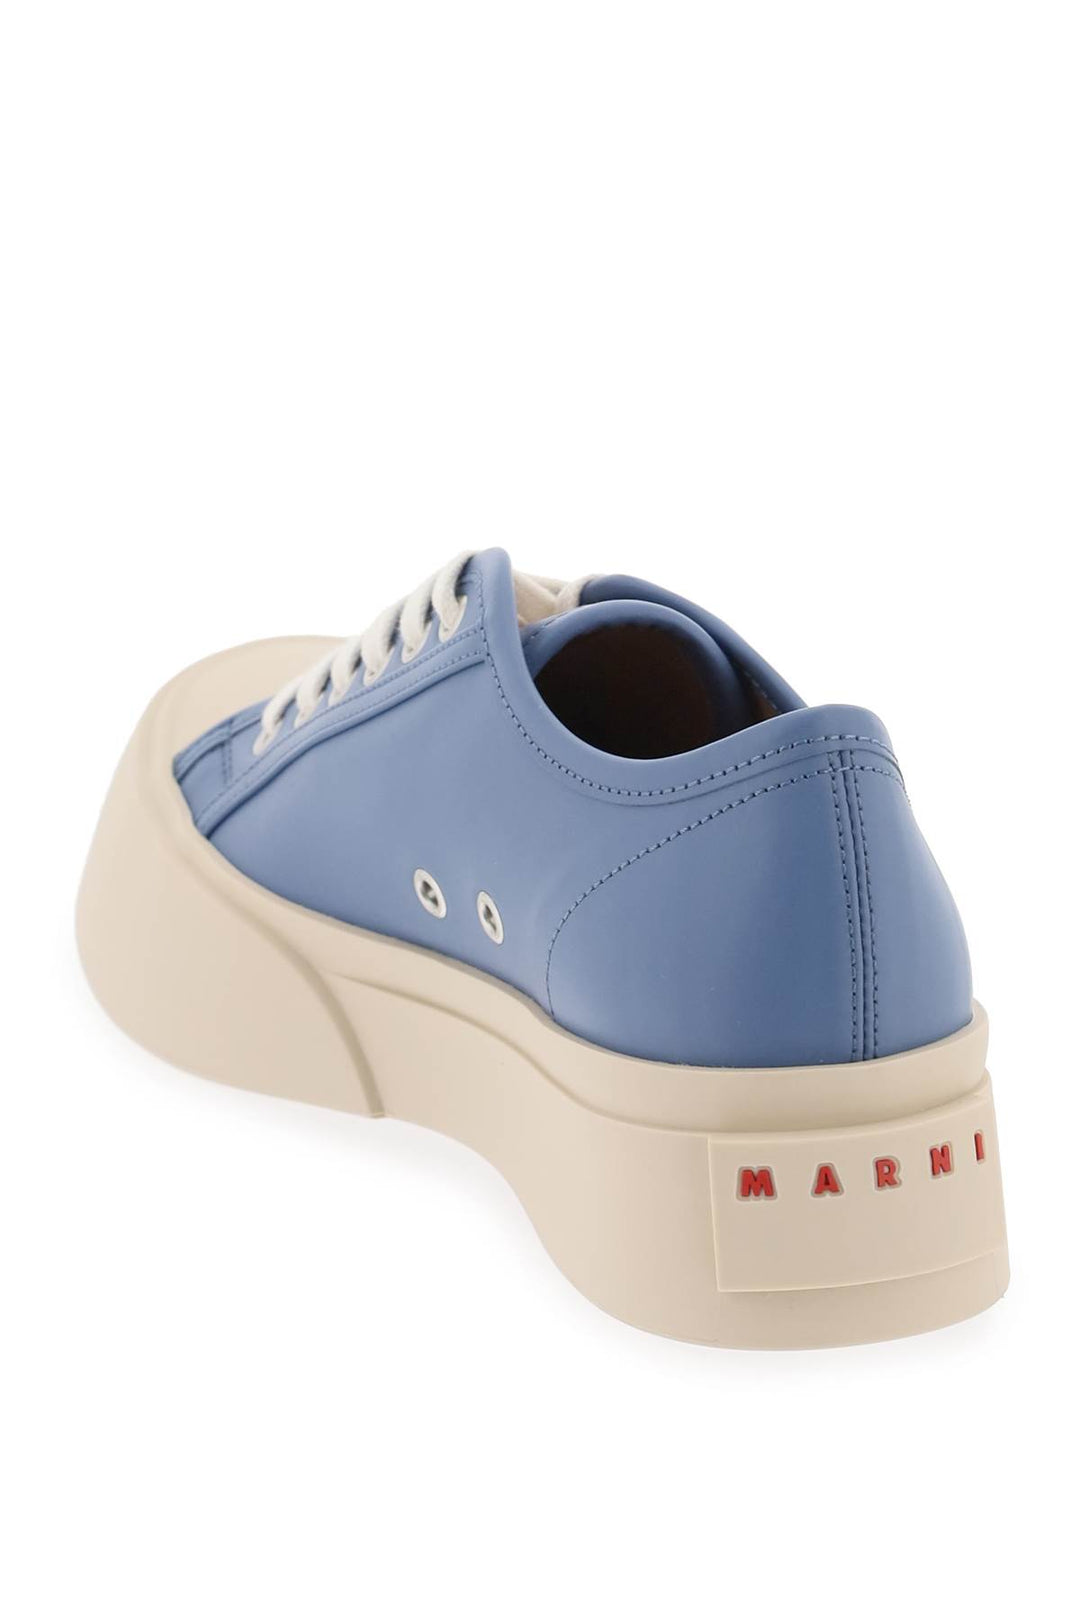 Marni Leather Pablo Sneakers   Blue